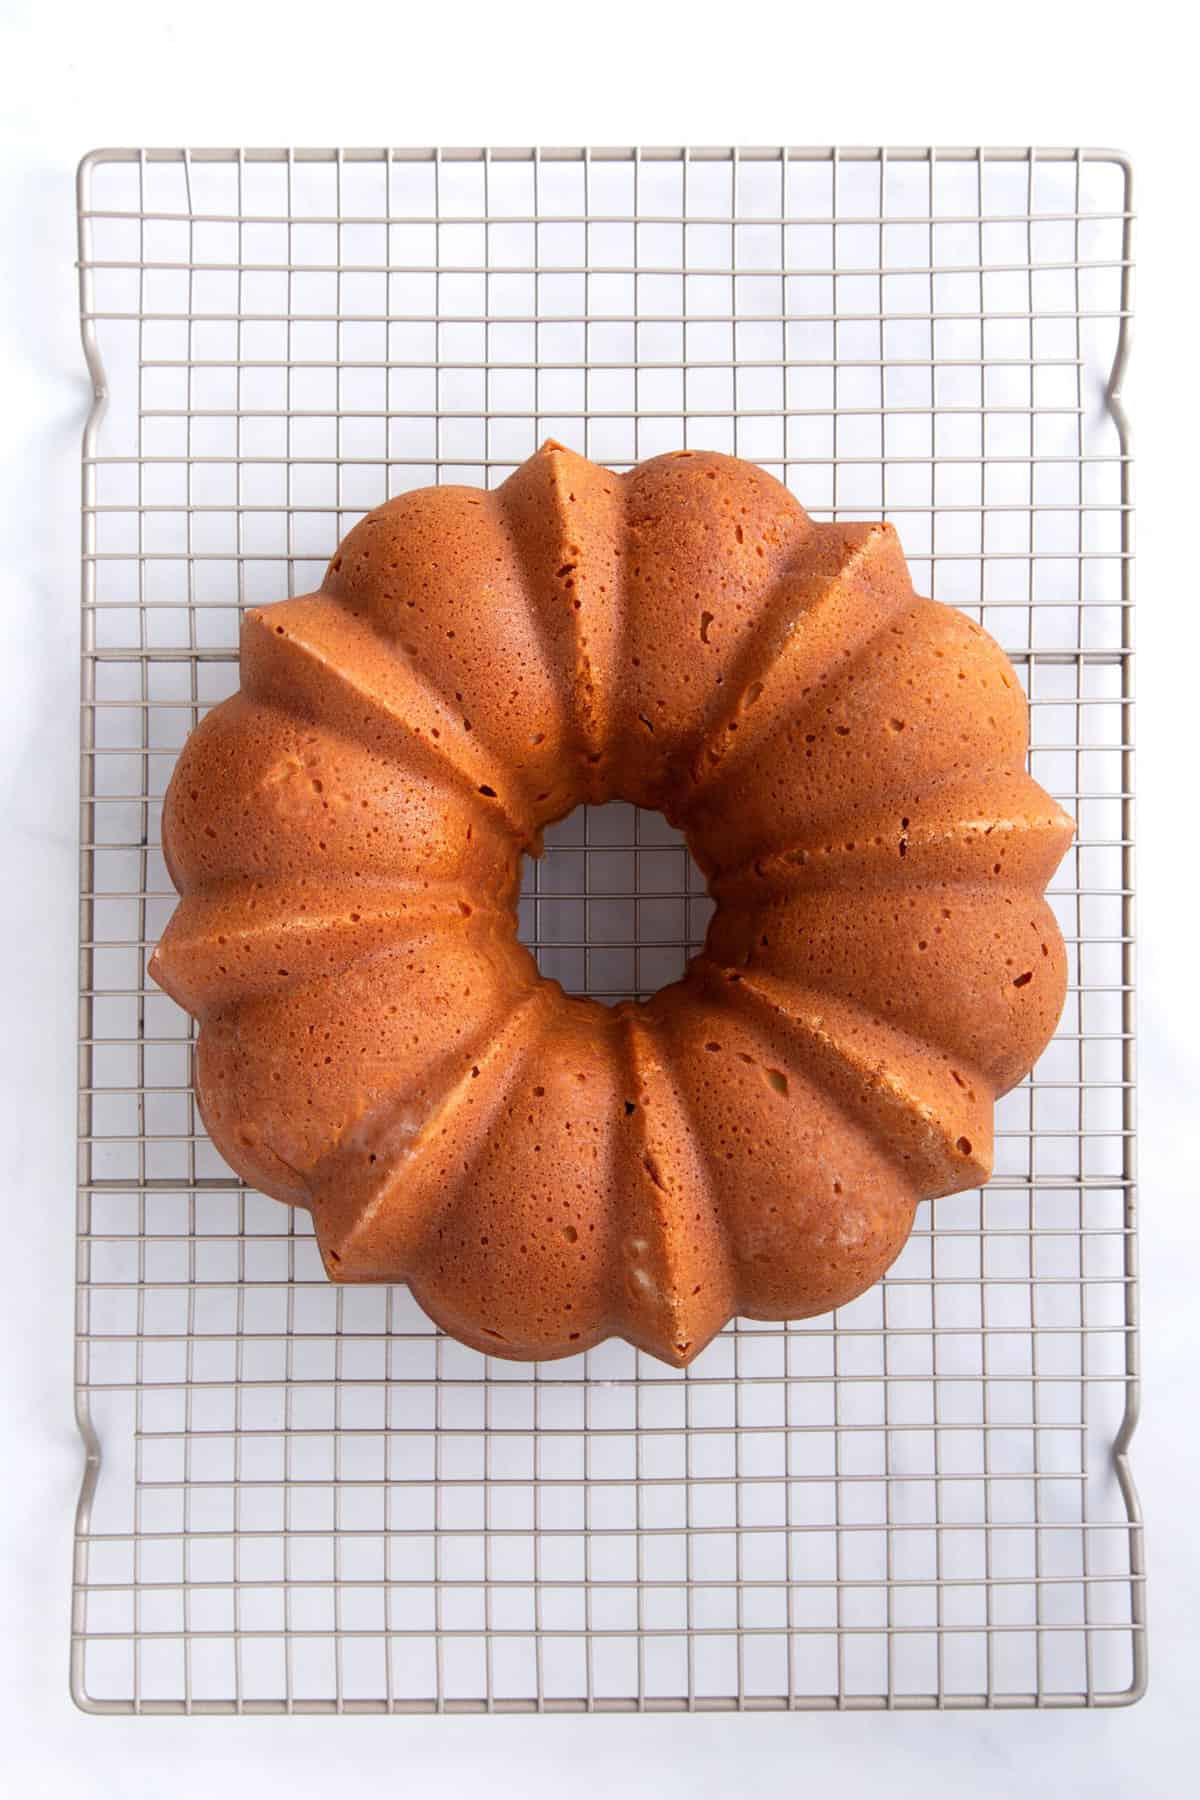 cream cheese pound cake in a bundt shape cooling on a metal wire rack